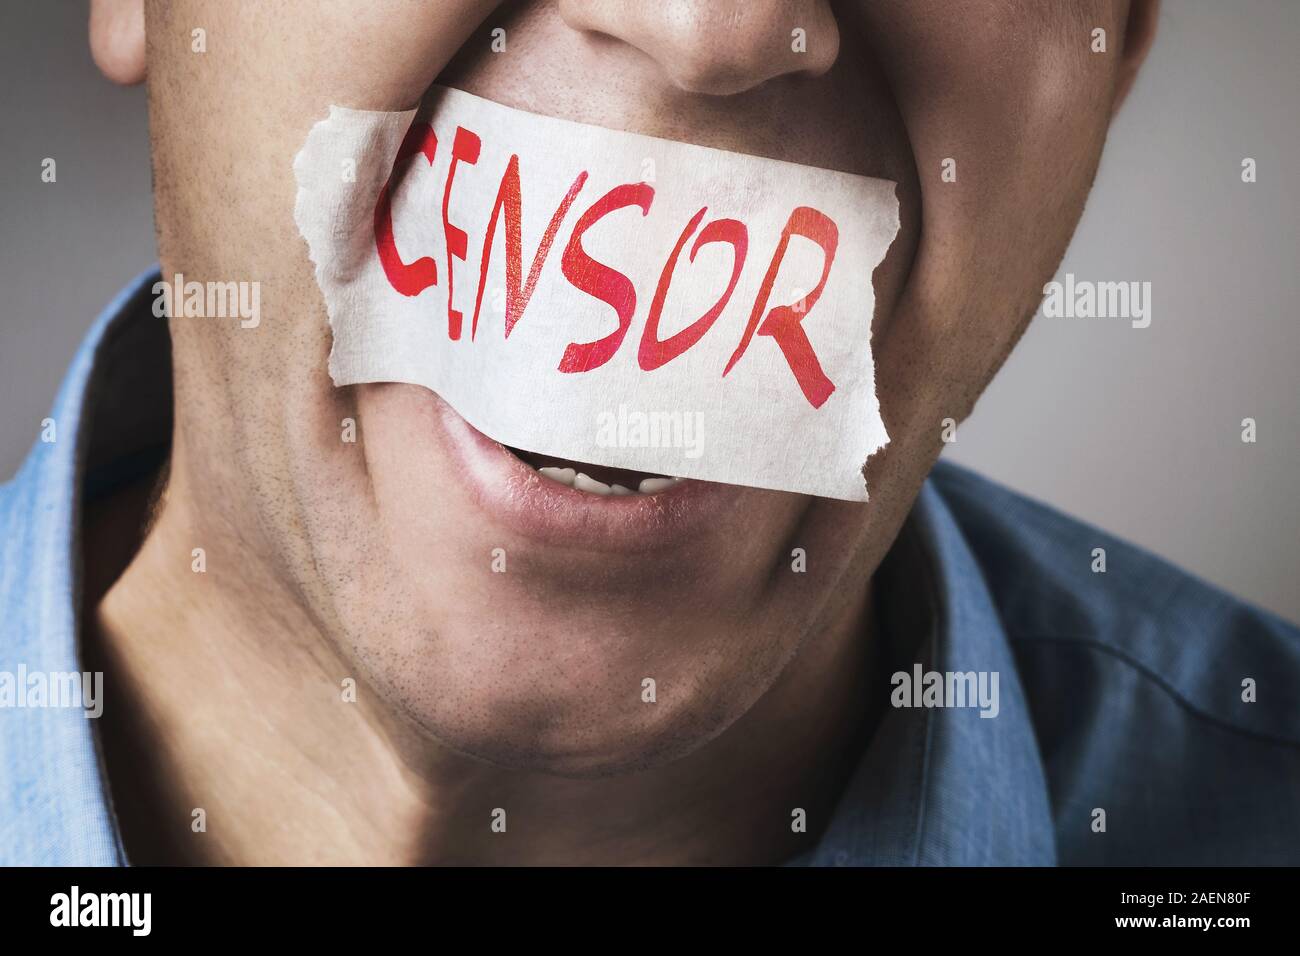 Censorship in society. A man is trying to scream, but his mouth is sealed with adhesive tape with the words censor, close-up Stock Photo